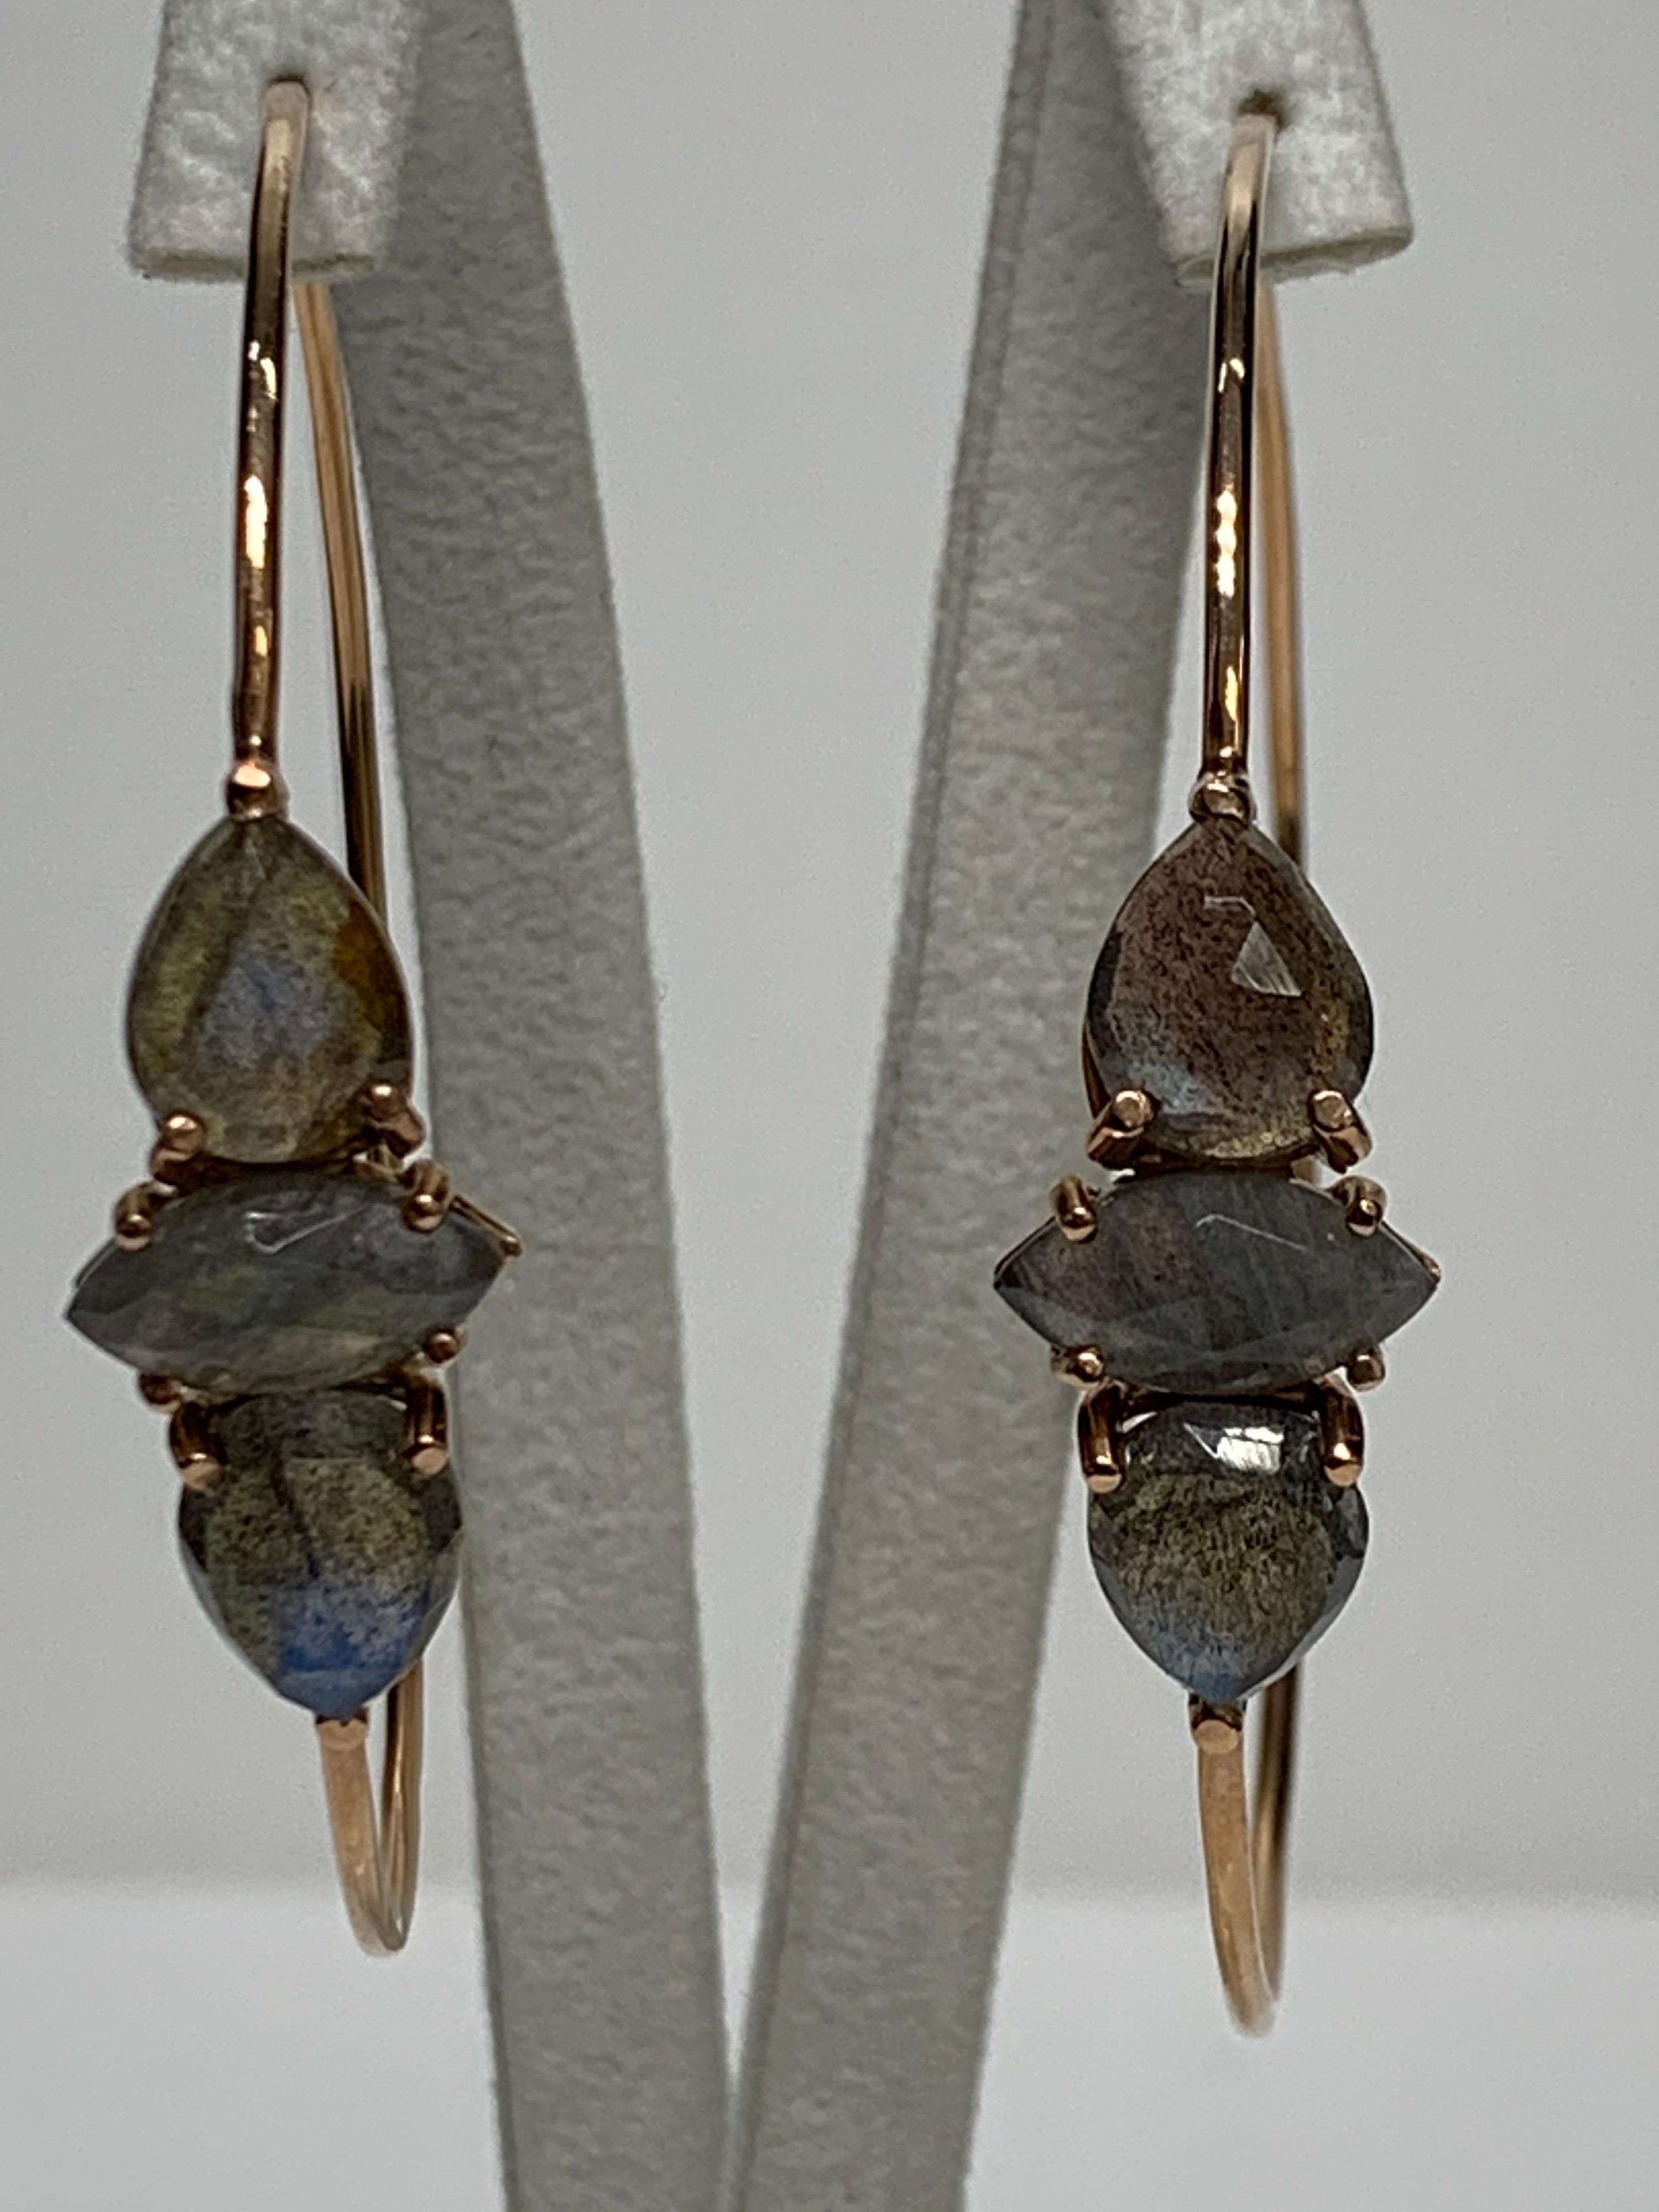 Labradorite Marquise, Rose Gold Hoops Earrings

Featuring a pair of Labradorite Marquise Stone Hoop Earrings, set in 14K Rose Gold.

This one-of-a-kind pair of earrings was created by hand is certified, appraisal included, 100% insured. Processed